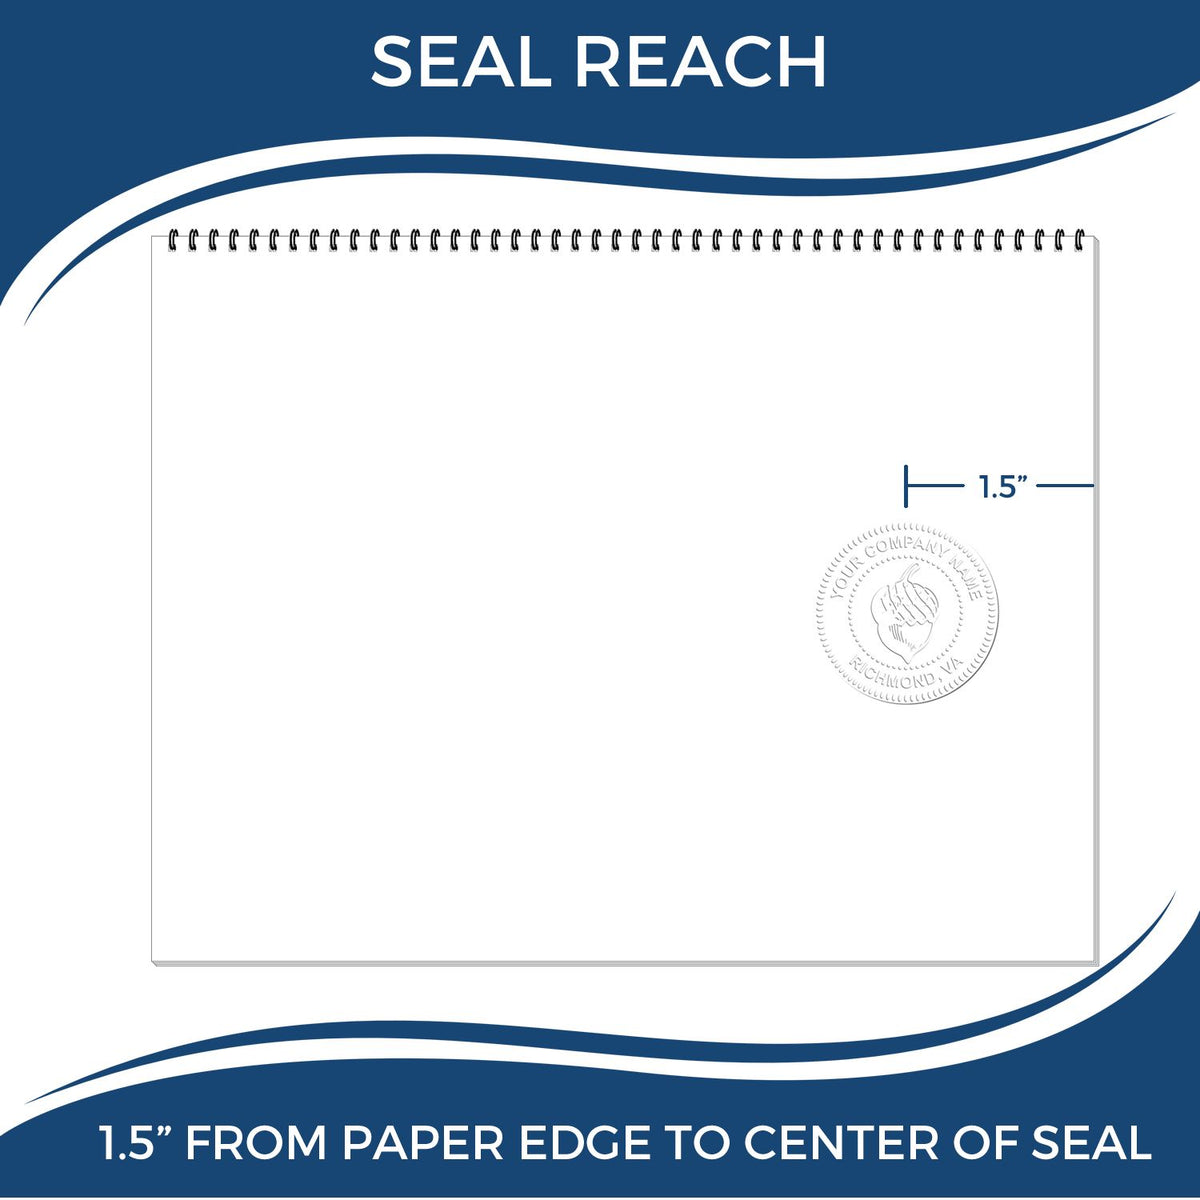 An infographic showing the seal reach which is represented by a ruler and a miniature seal image of the Soft West Virginia Professional Geologist Seal